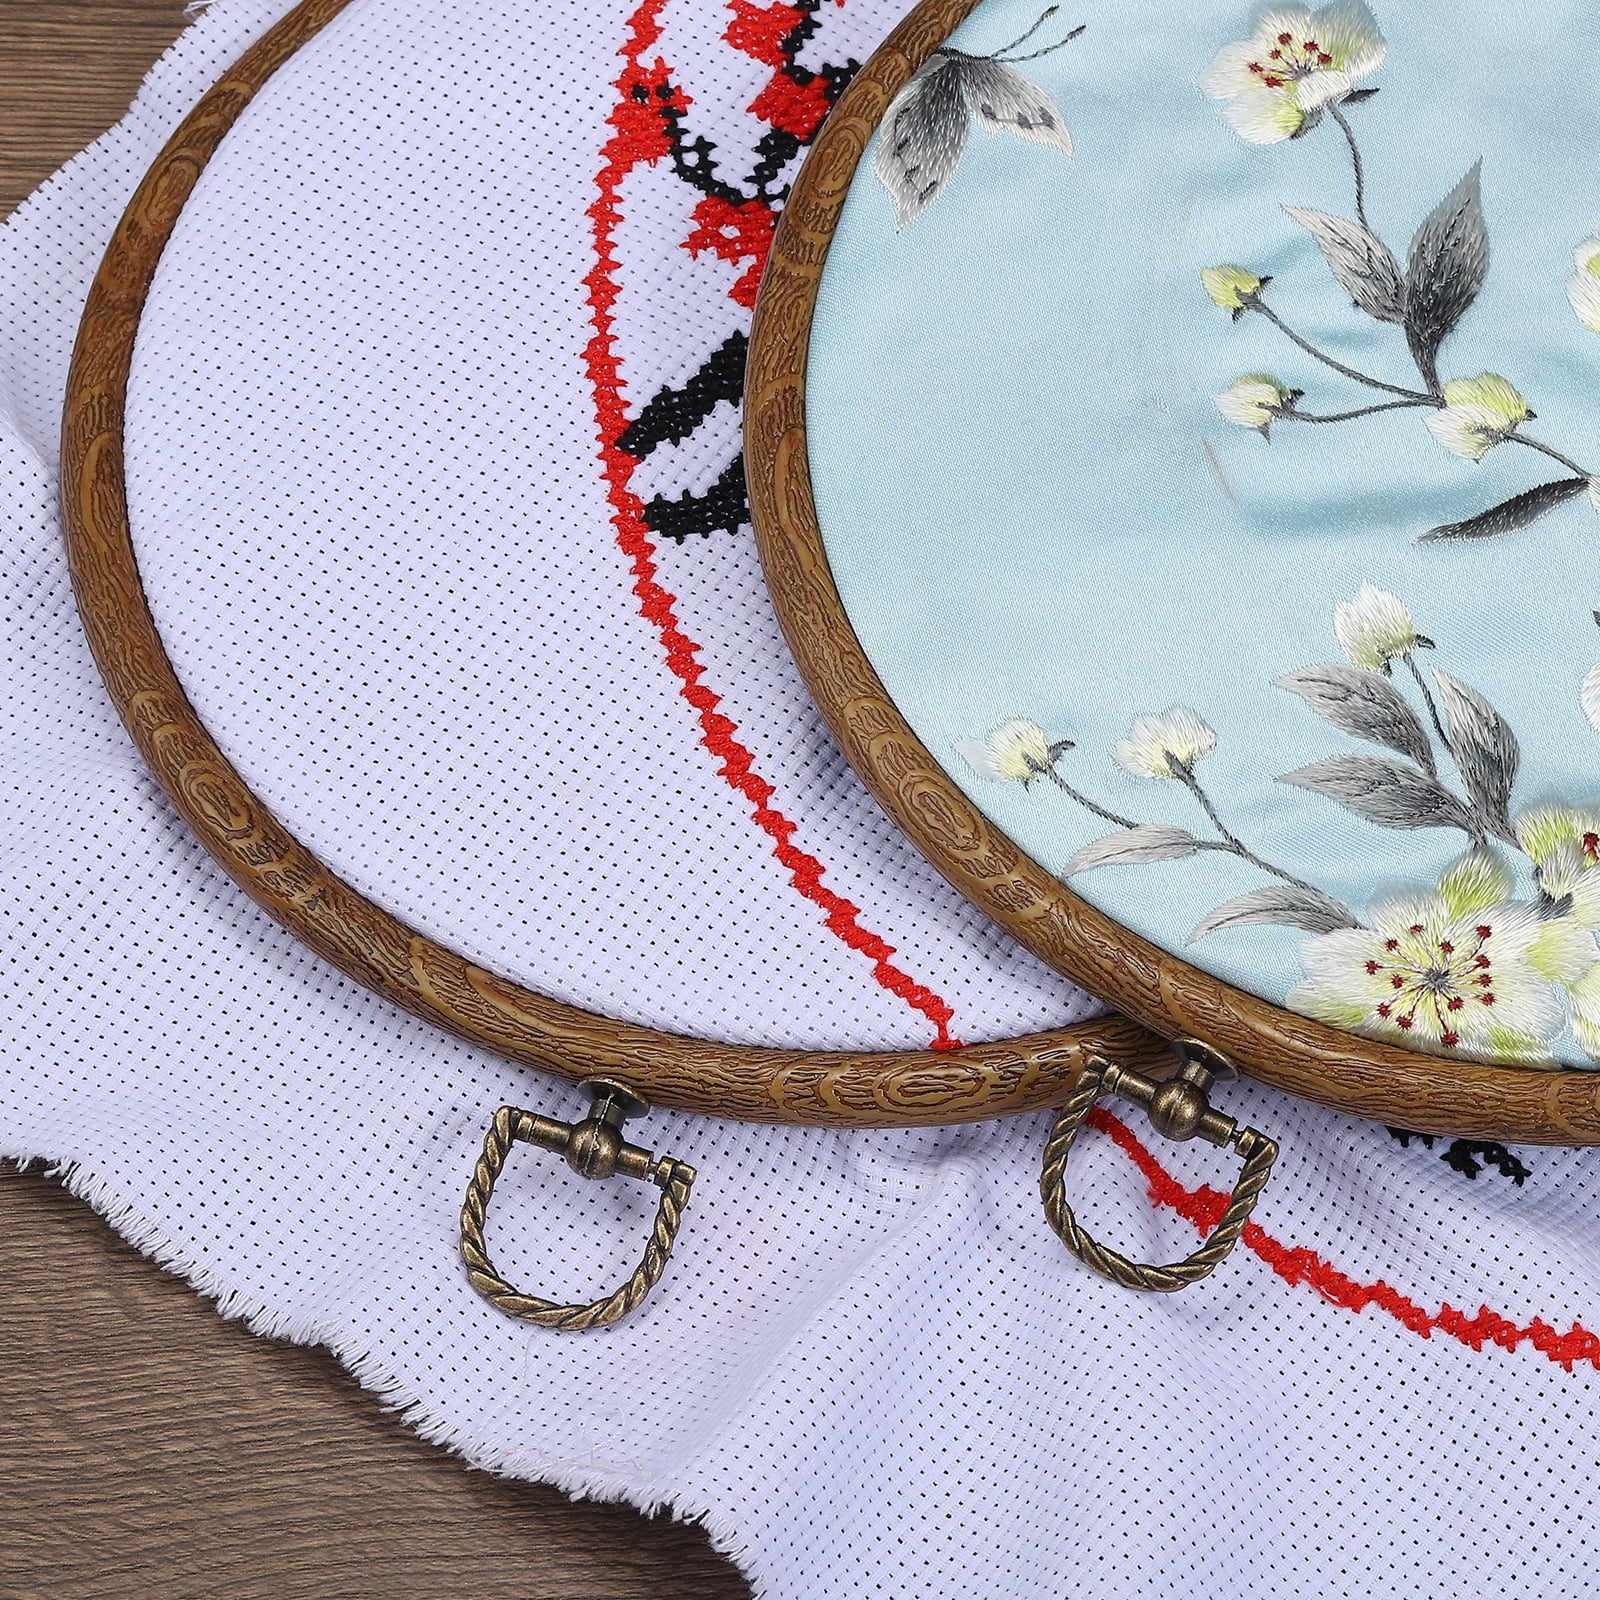 Oval Wooden Embroidery Hoop - 6 x 3.5 – Hoop and Frame